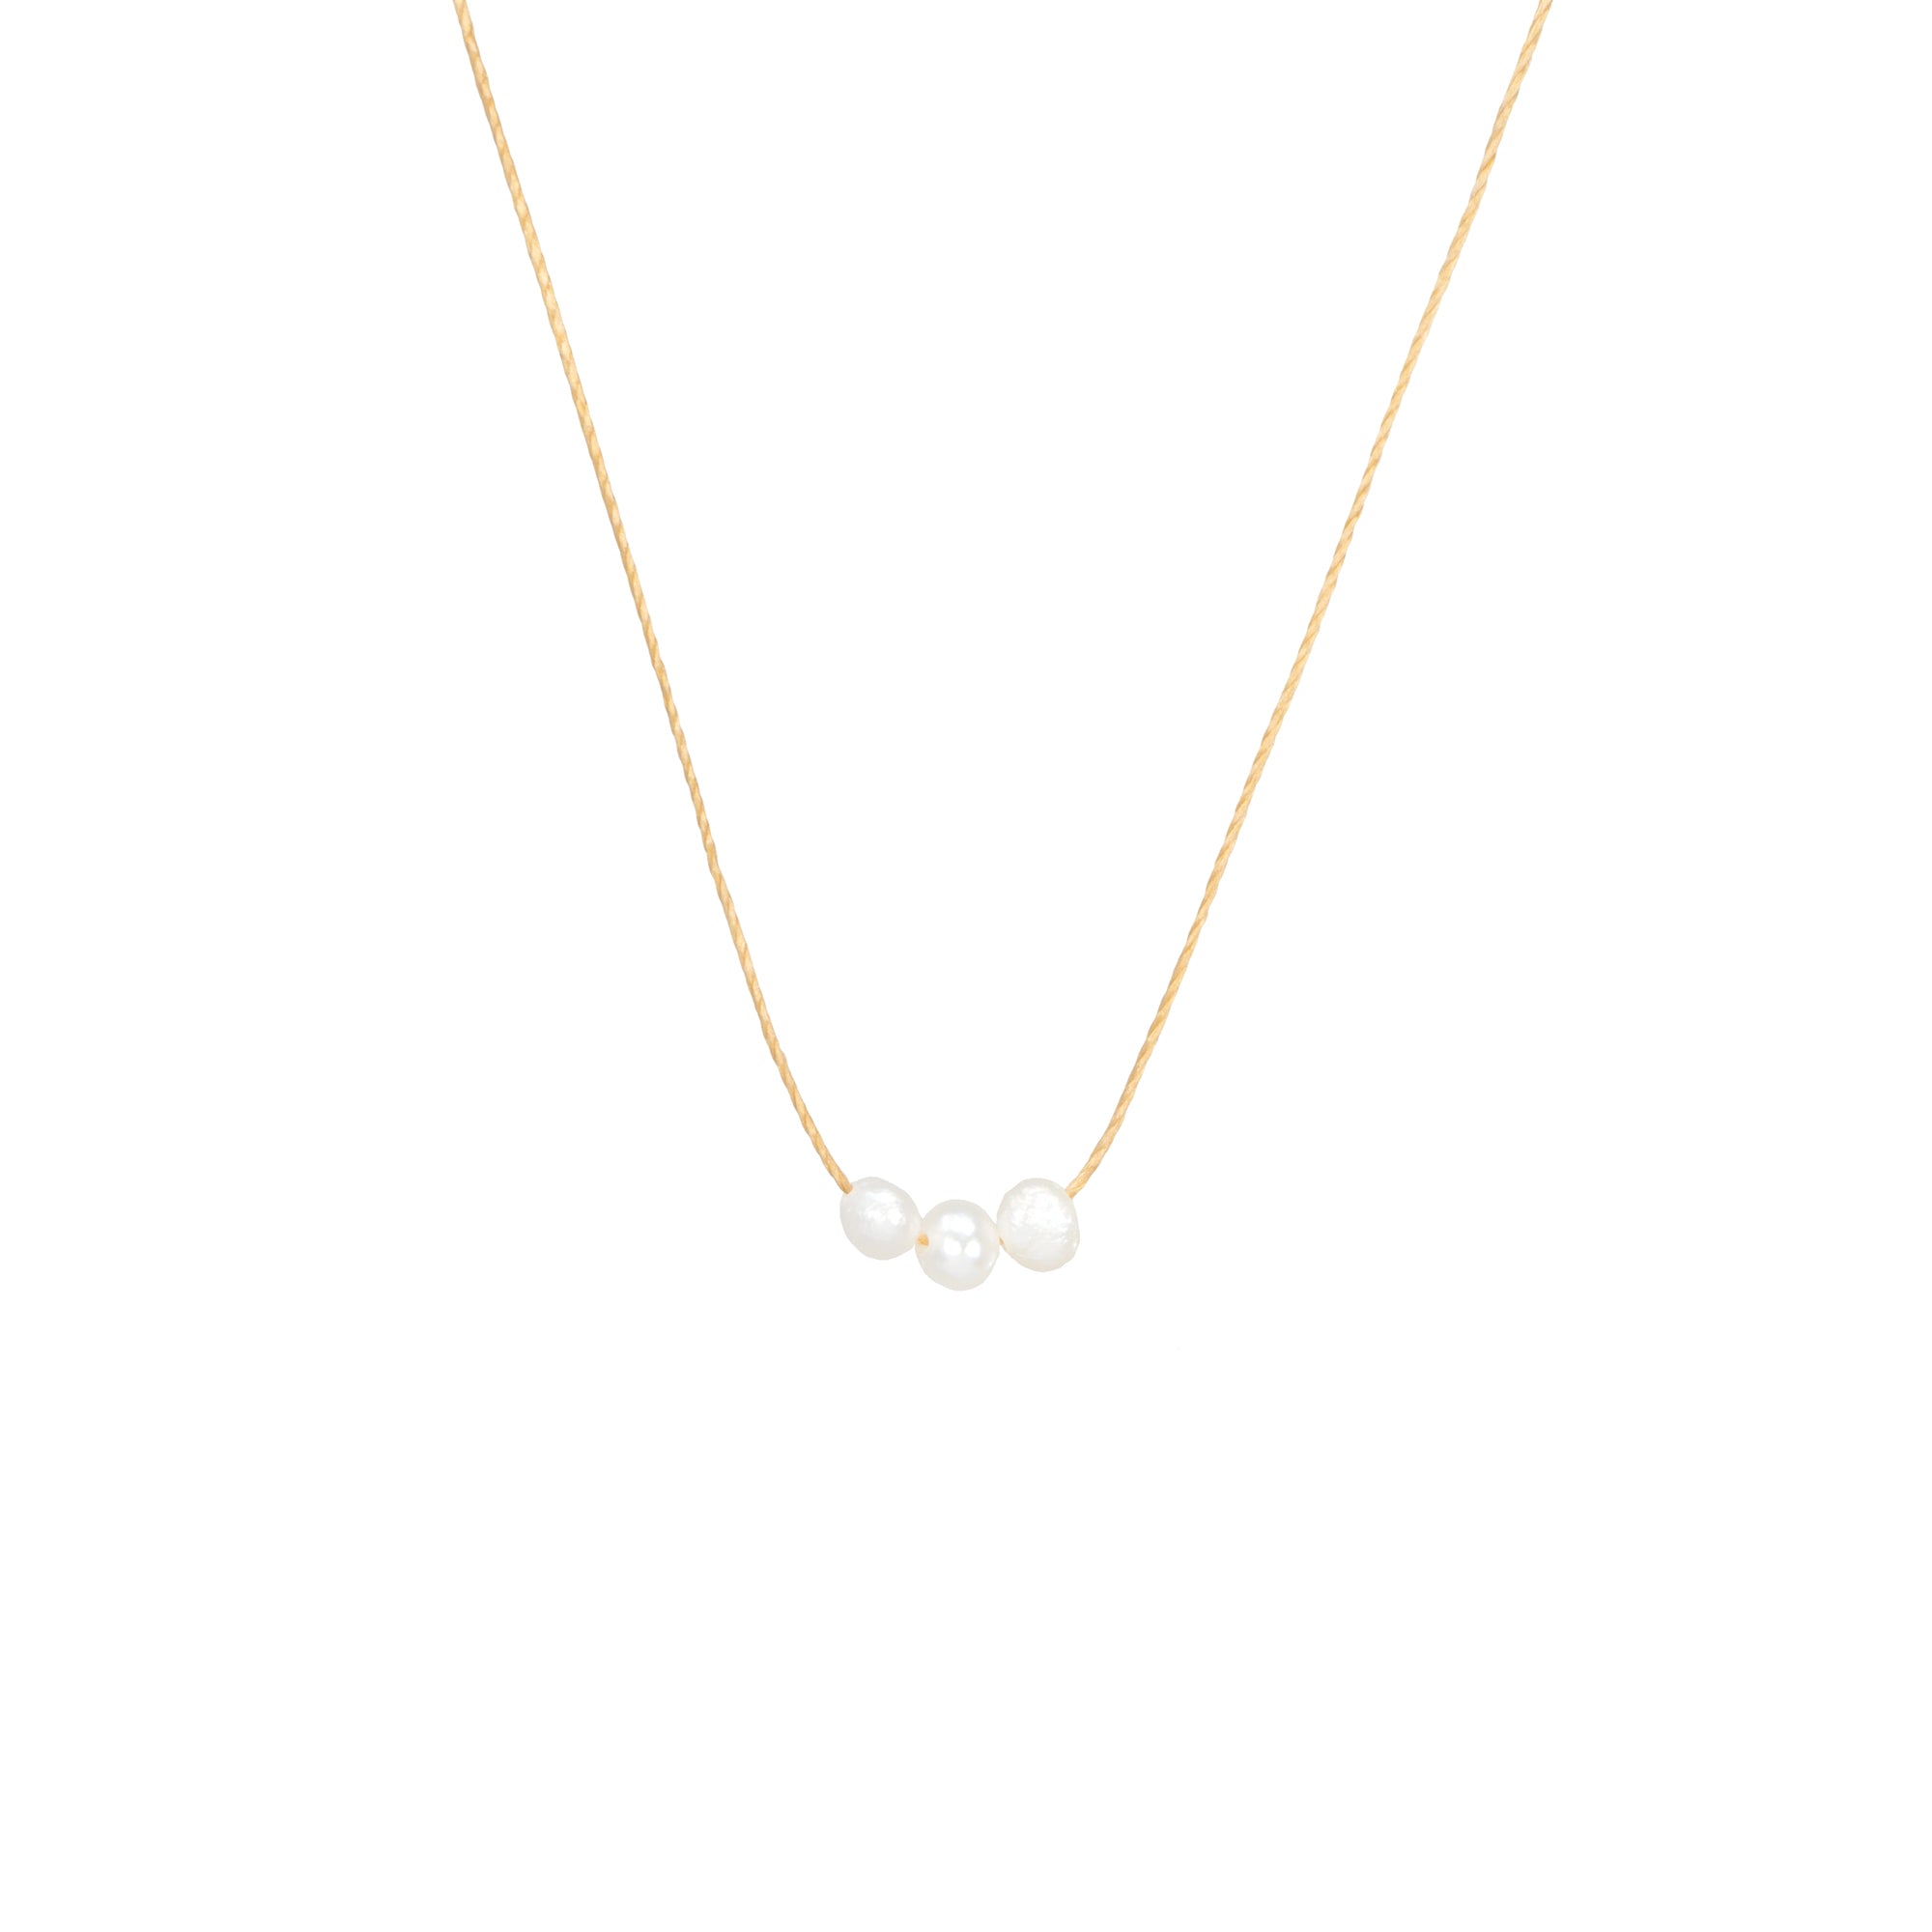 make a wish necklace with three petite pearls